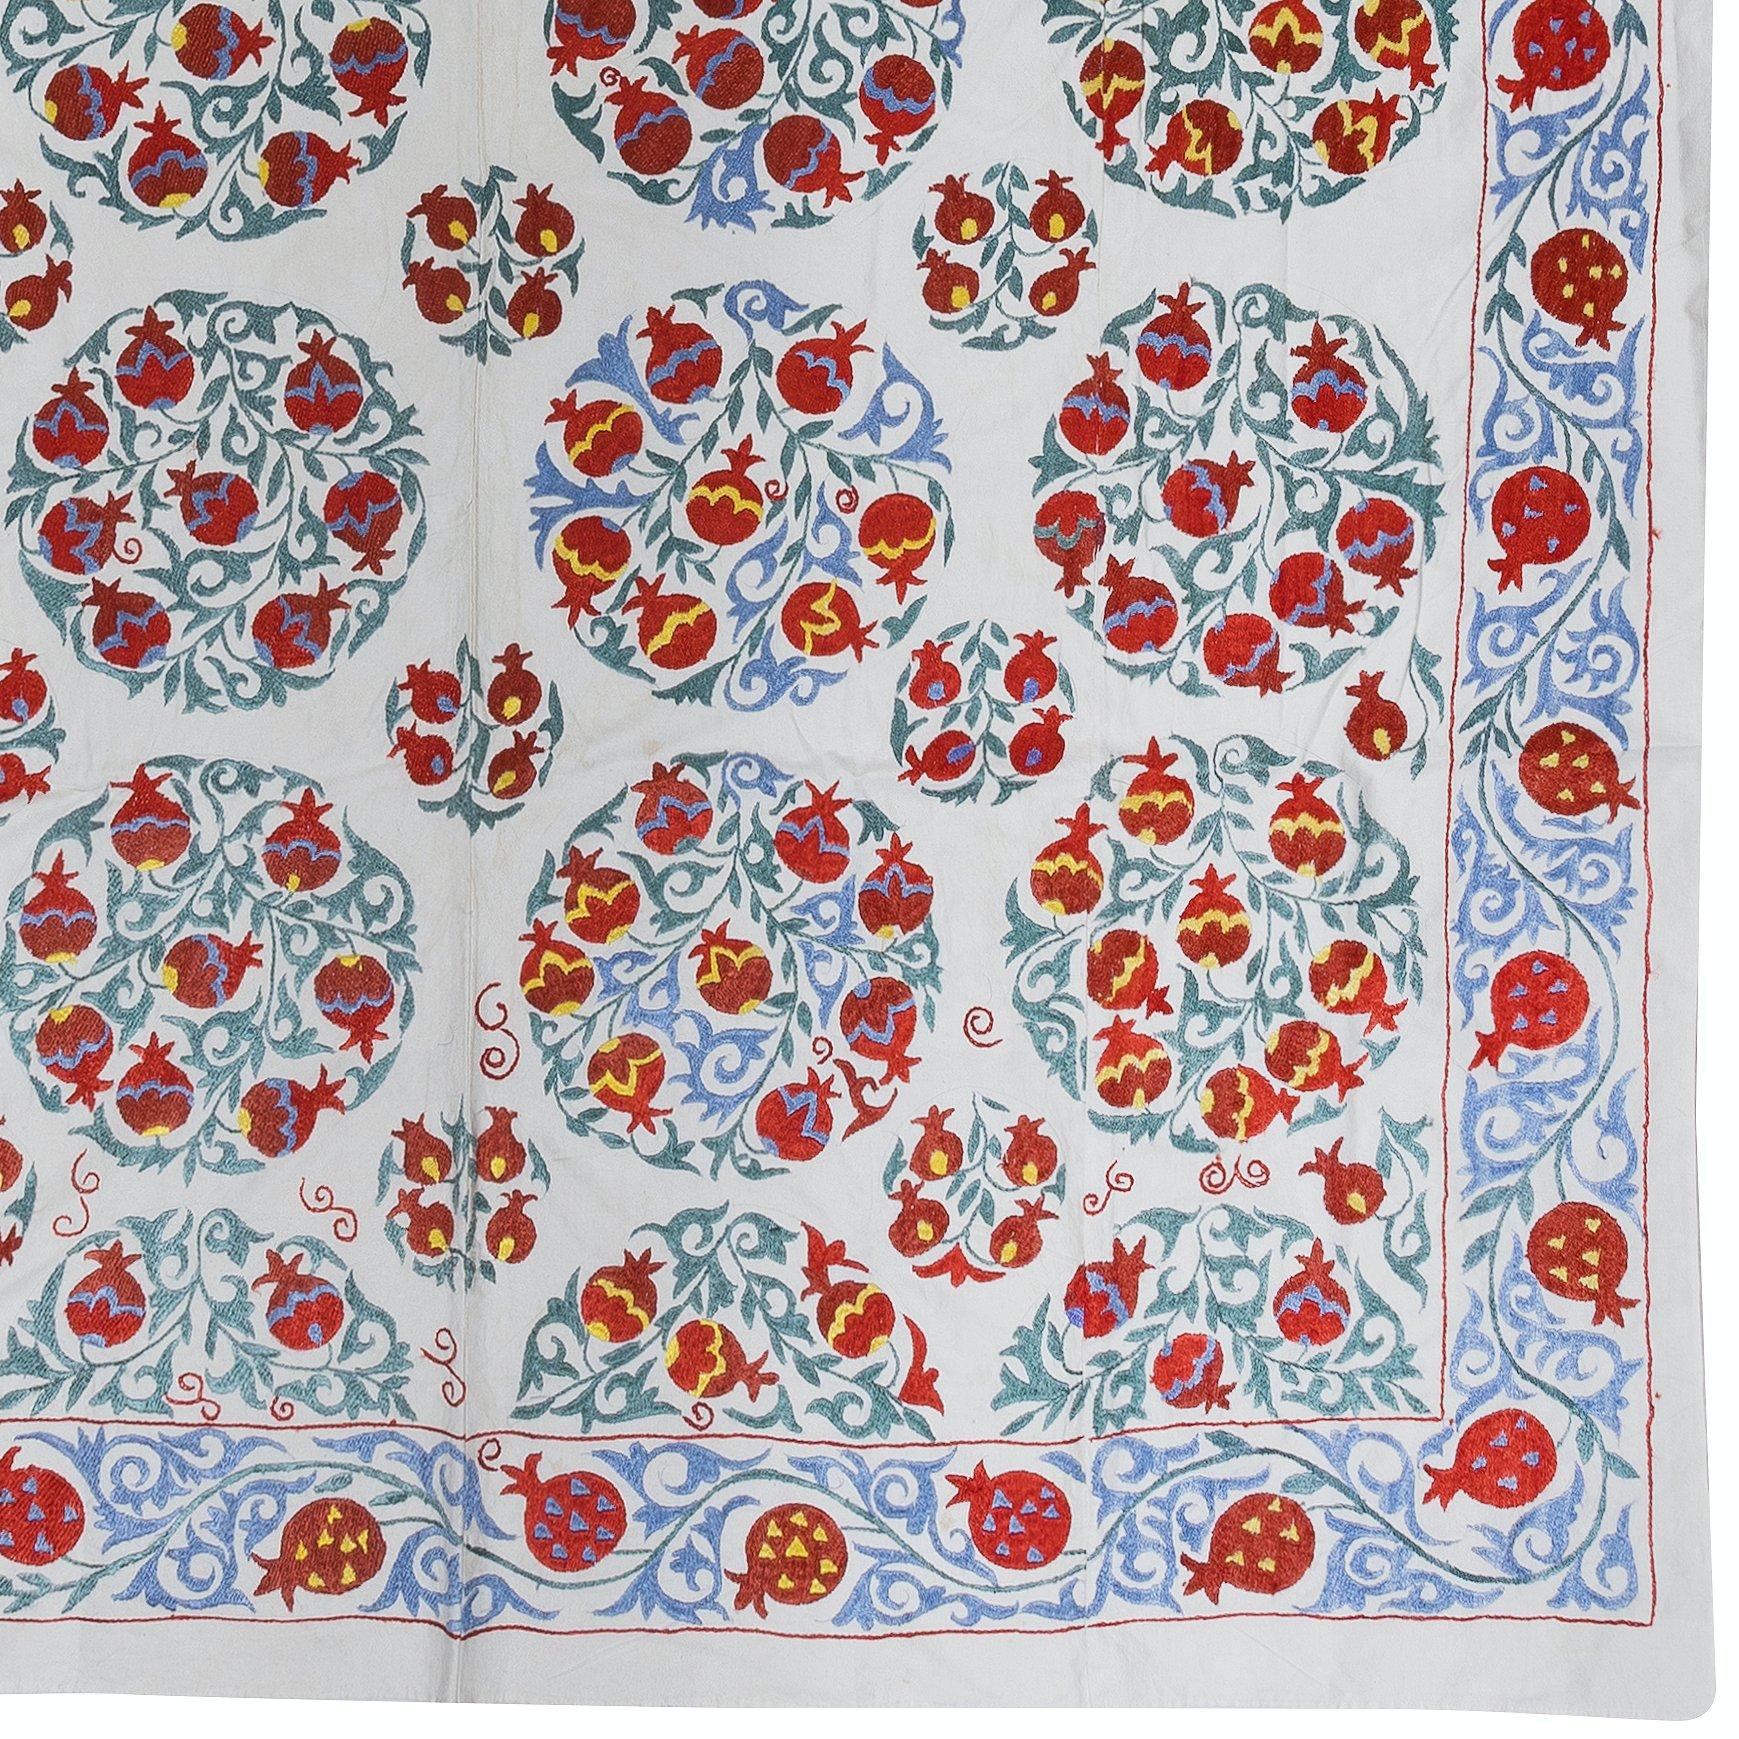 Suzani 6x8.5 ft Silk Embroidery Wall Hanging, Pomegranate Design Bed Cover, Wall Decor For Sale